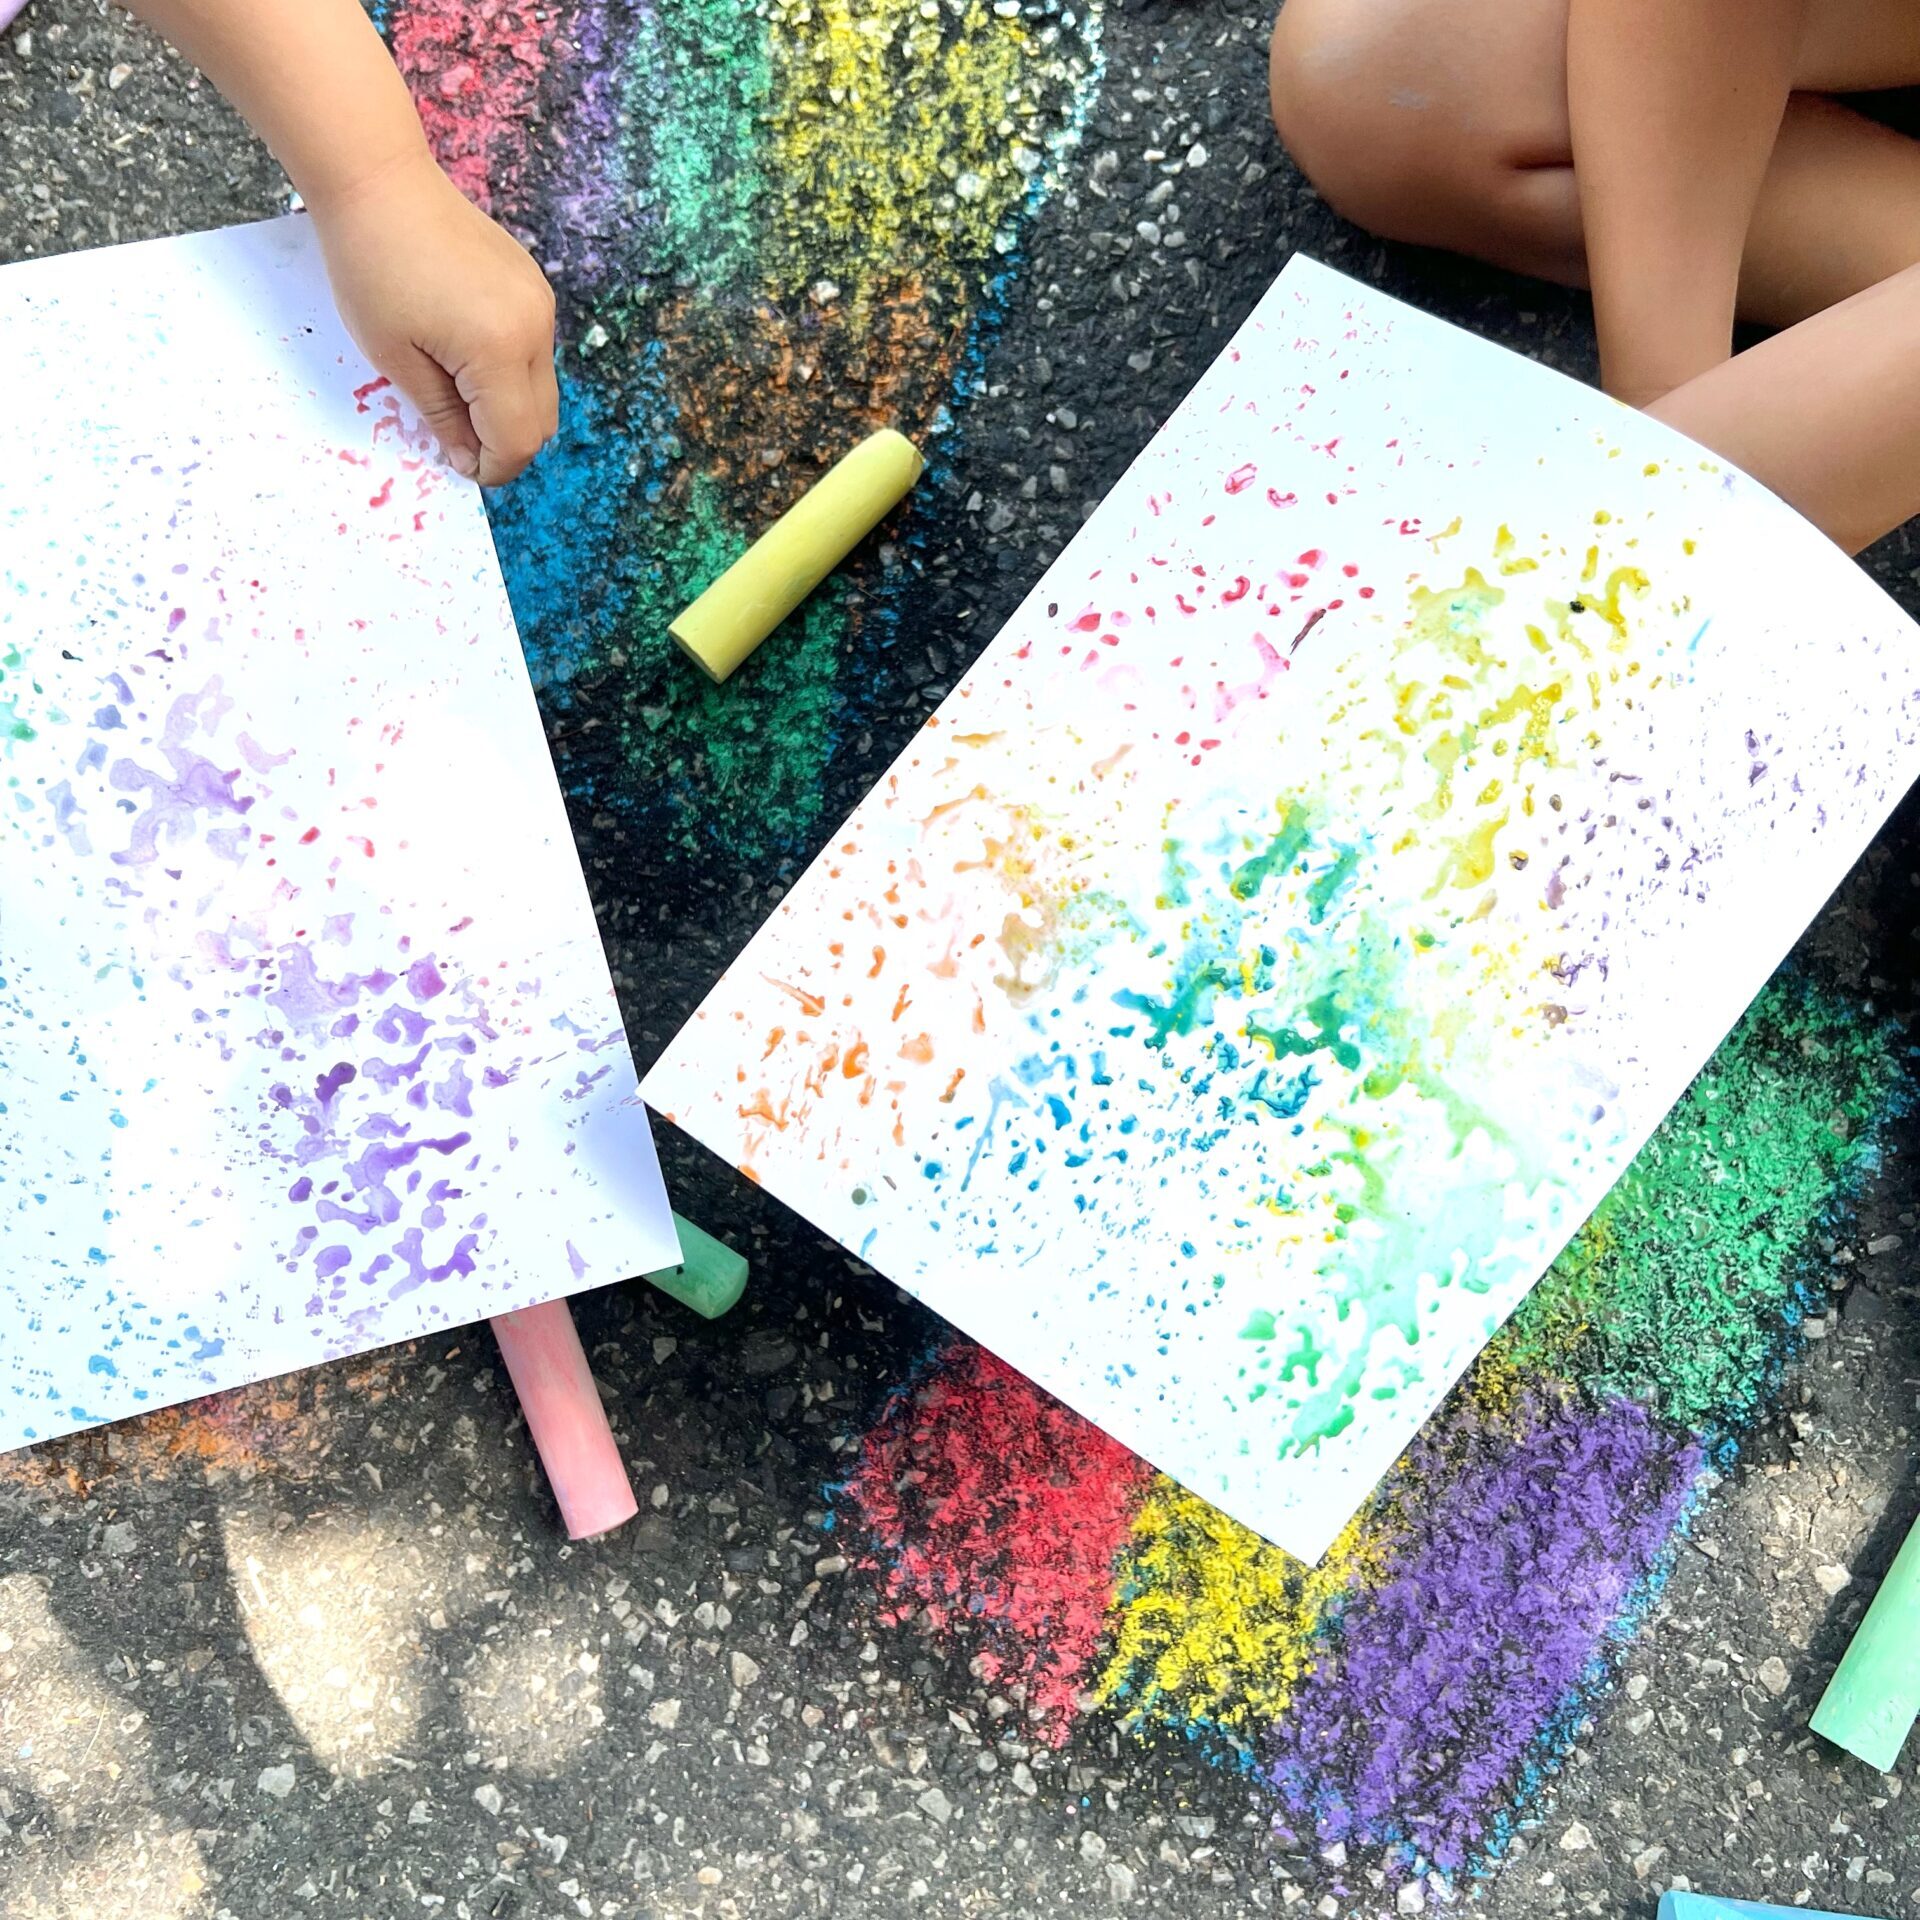 Kids Printmaking with Sidewalk Chalk. Holding colorful Monoprints on paper complete guide to process art for preschoolers